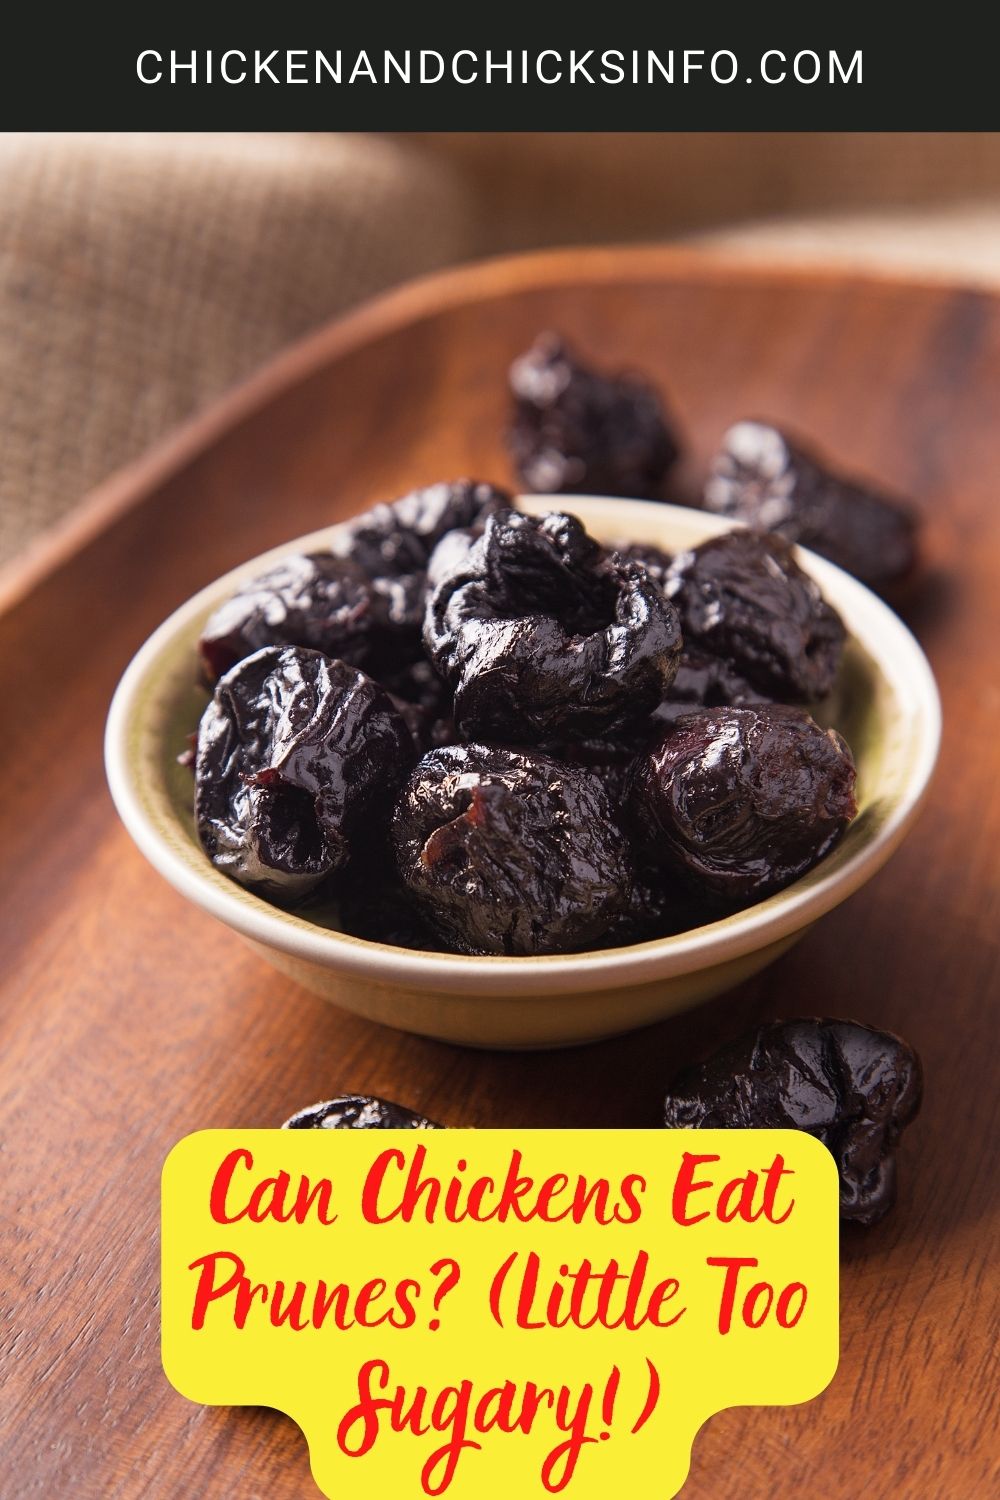 Can Chickens Eat Prunes? (Little Too Sugary!) poster.
